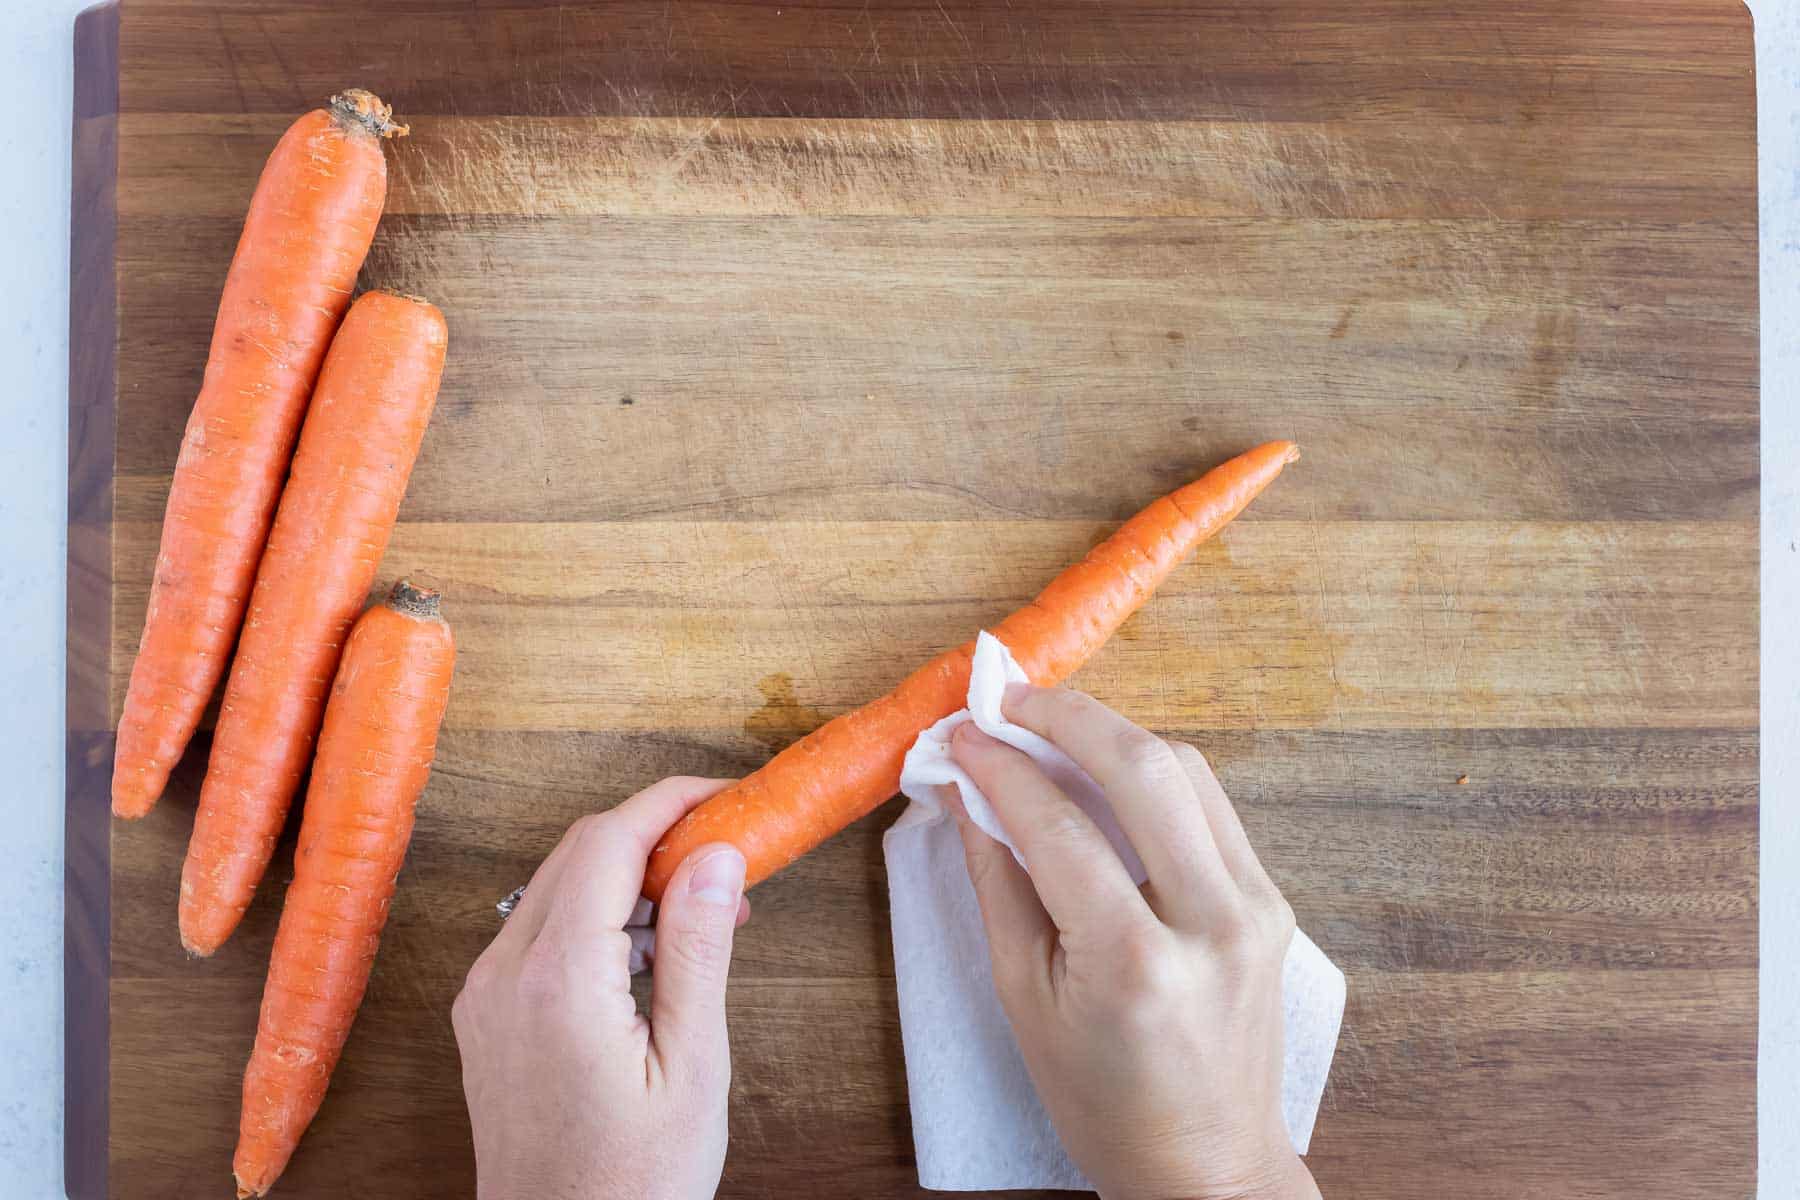 A whole carrot is cleaned with a paper towel.